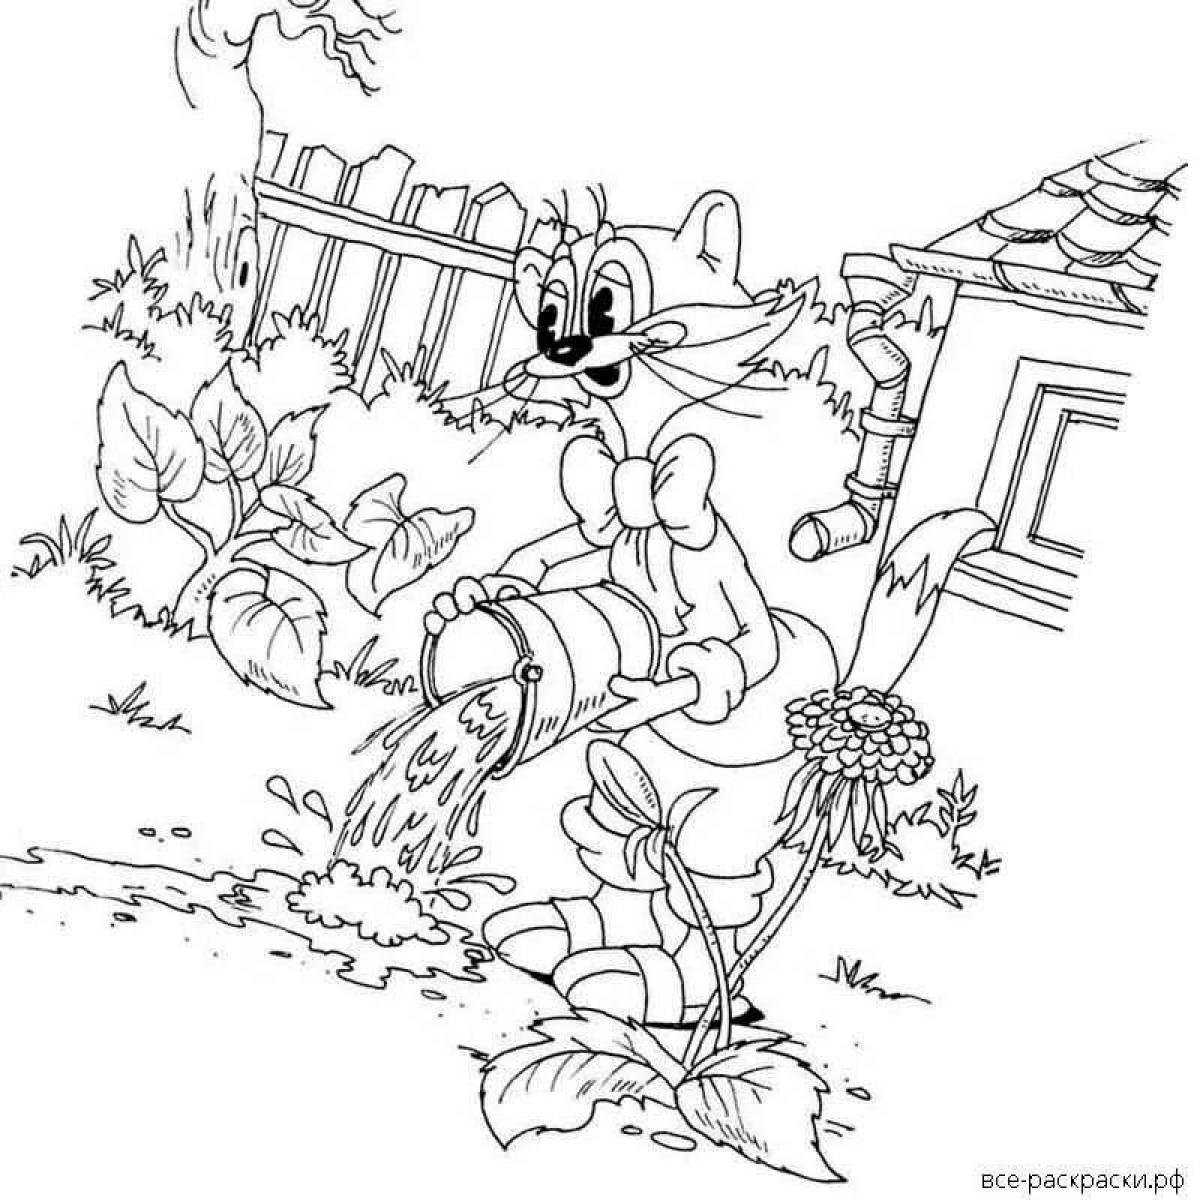 Amazing coloring book for kids leopold cat